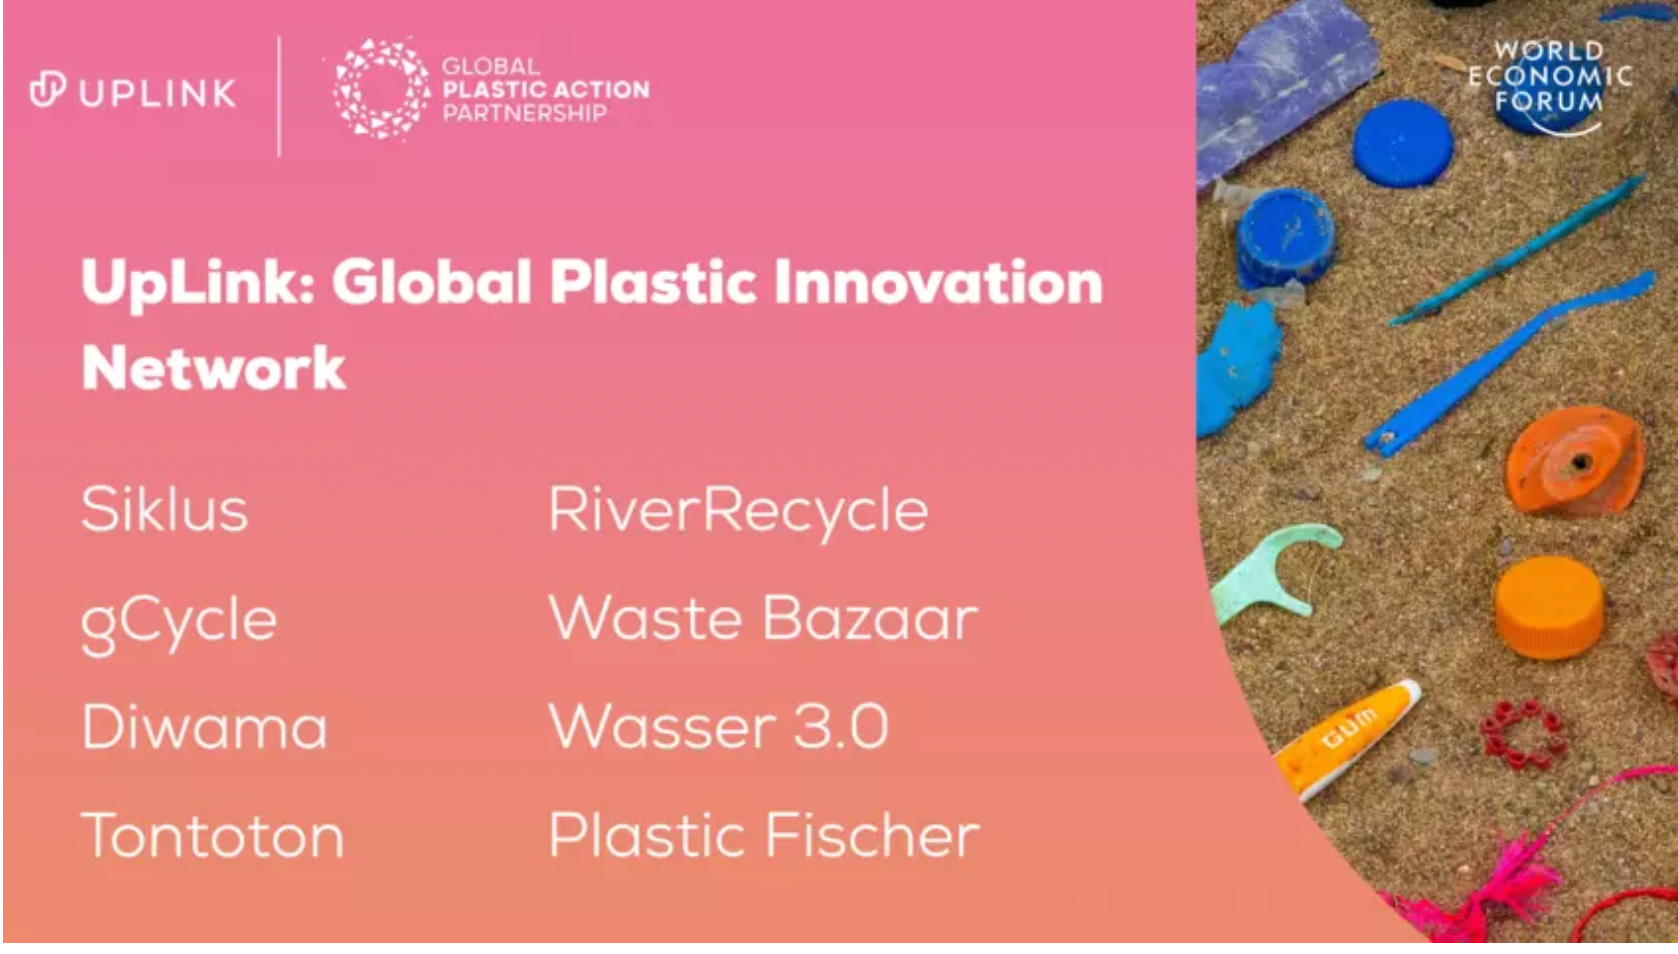 8 inspiring innovations that are helping to fight plastic pollution